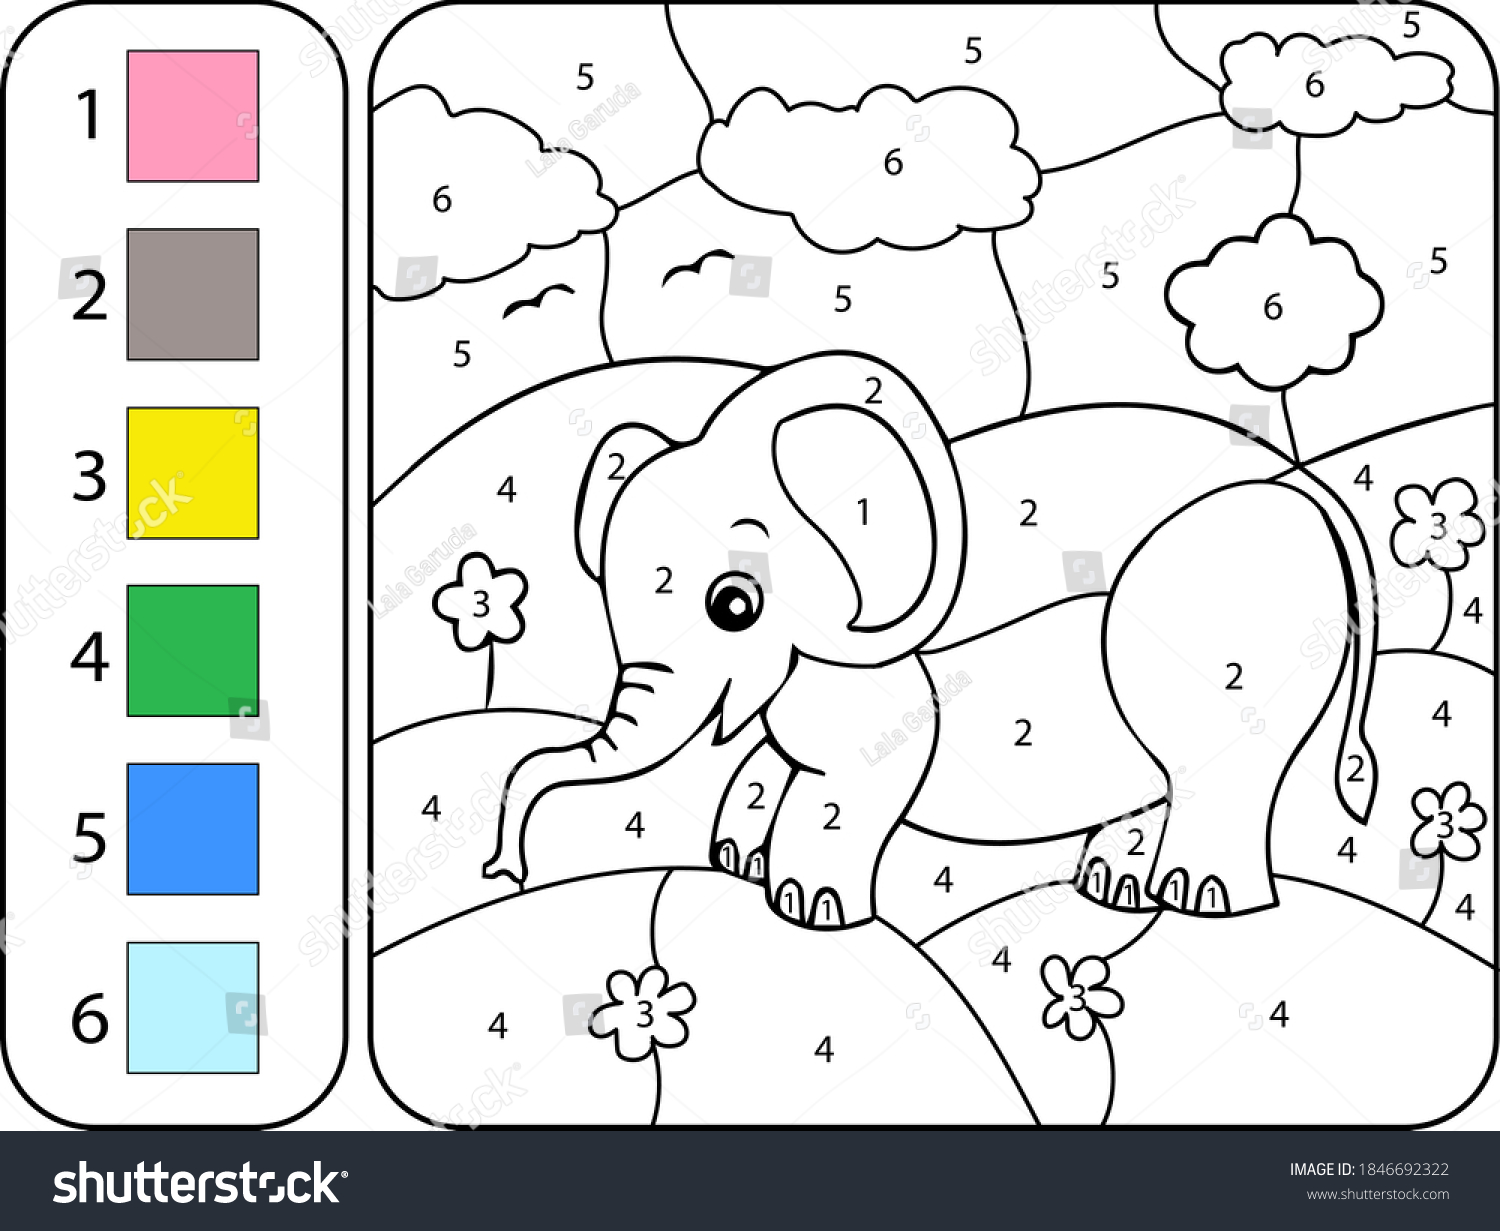 Color Elephant By Numbers Cartoon Coloring Stock Vector (Royalty Free ...